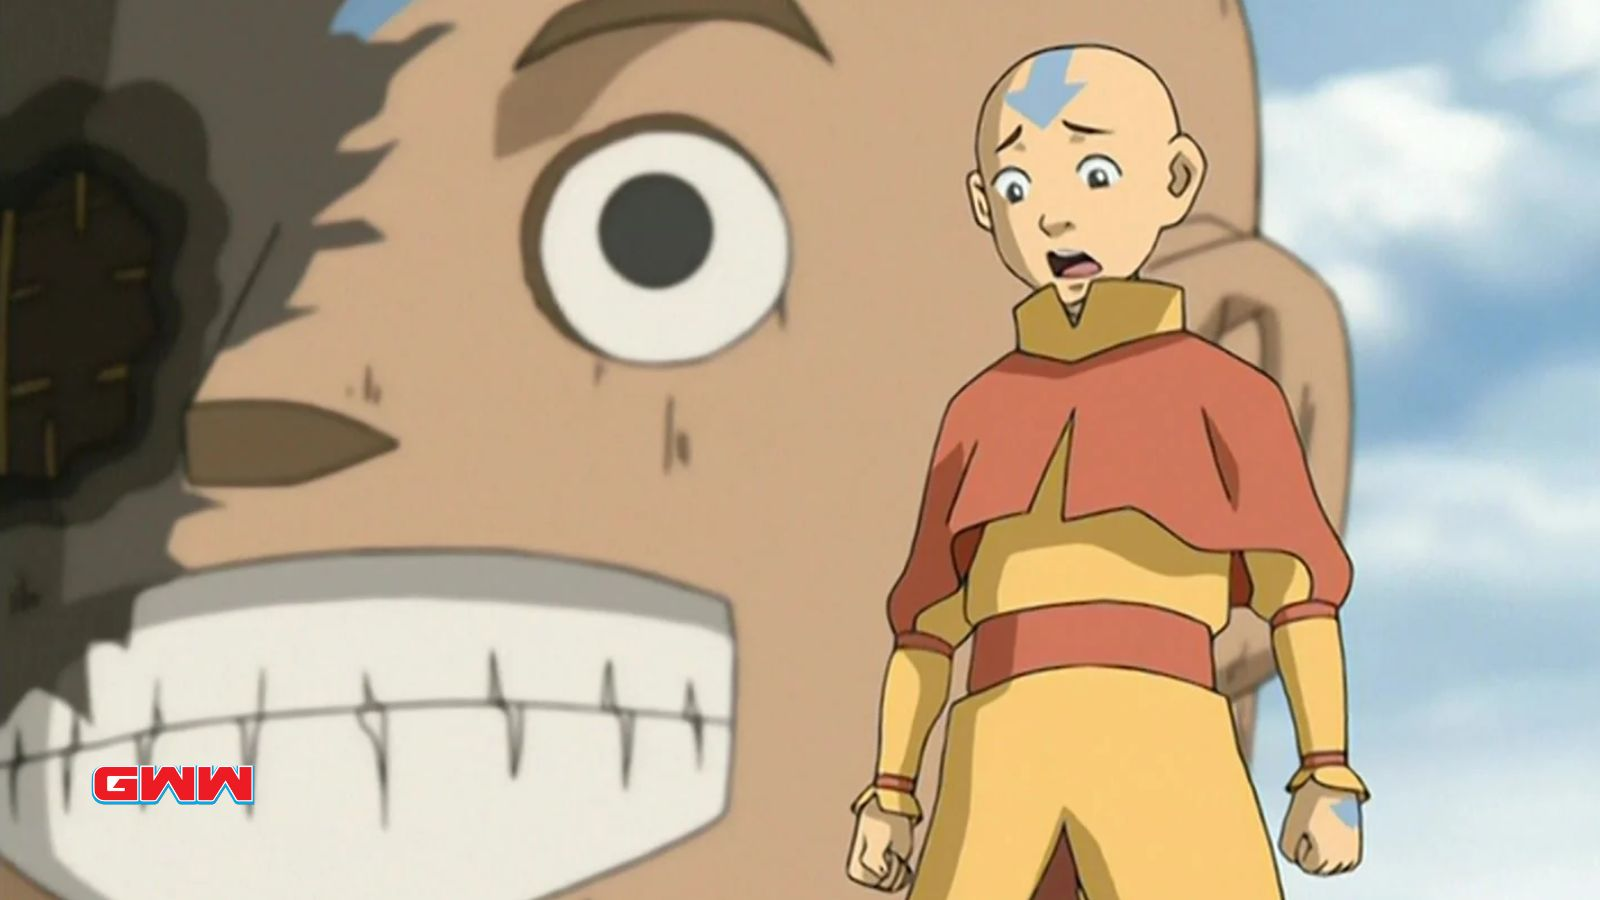 Aang looking shocked and confused, is Avatar an anime